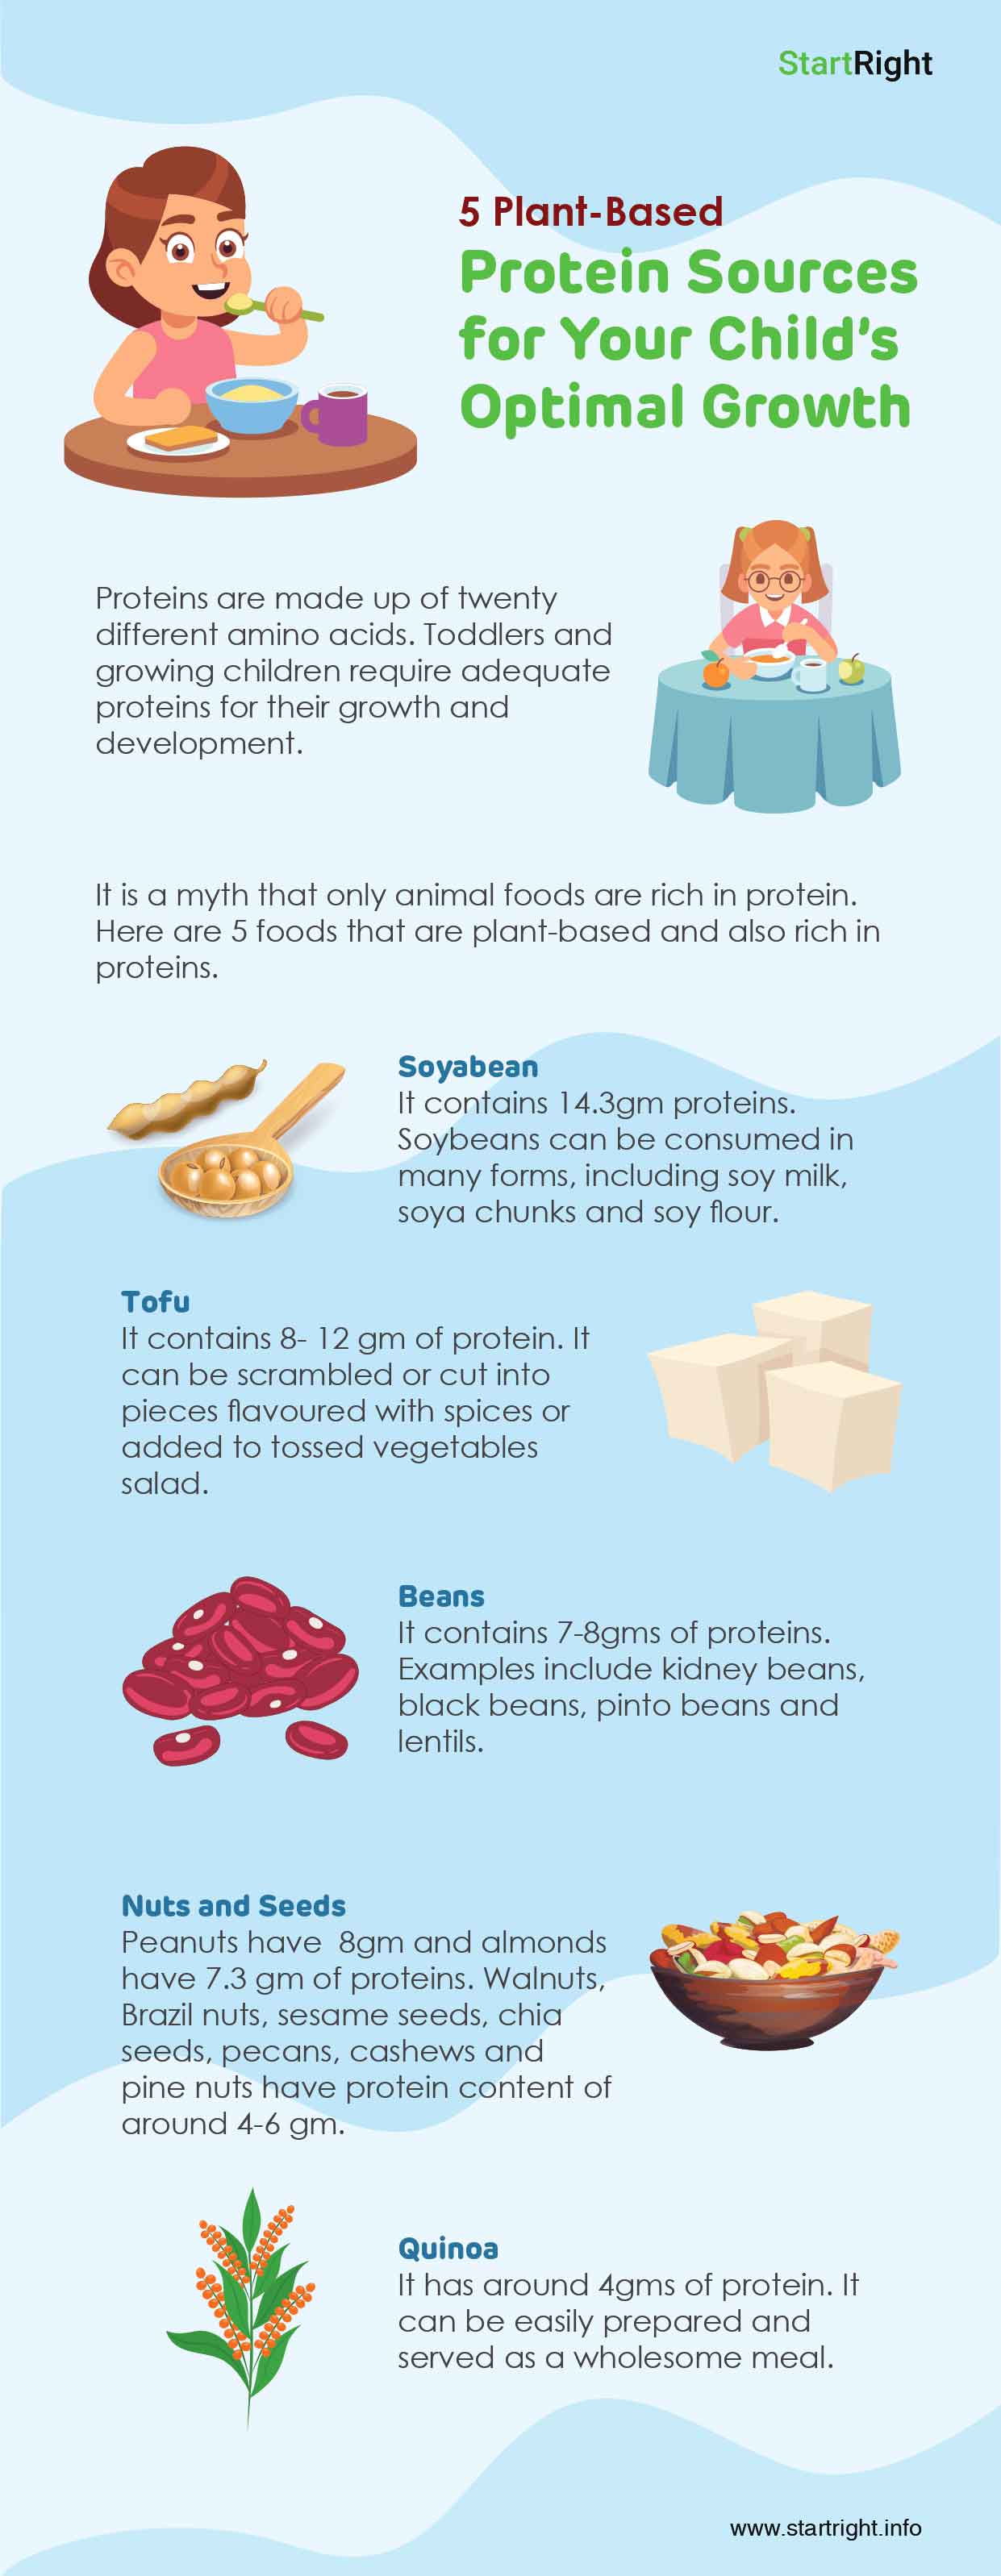 Plant-Based Protein Sources for Your Child's Optimal Growth - Startright